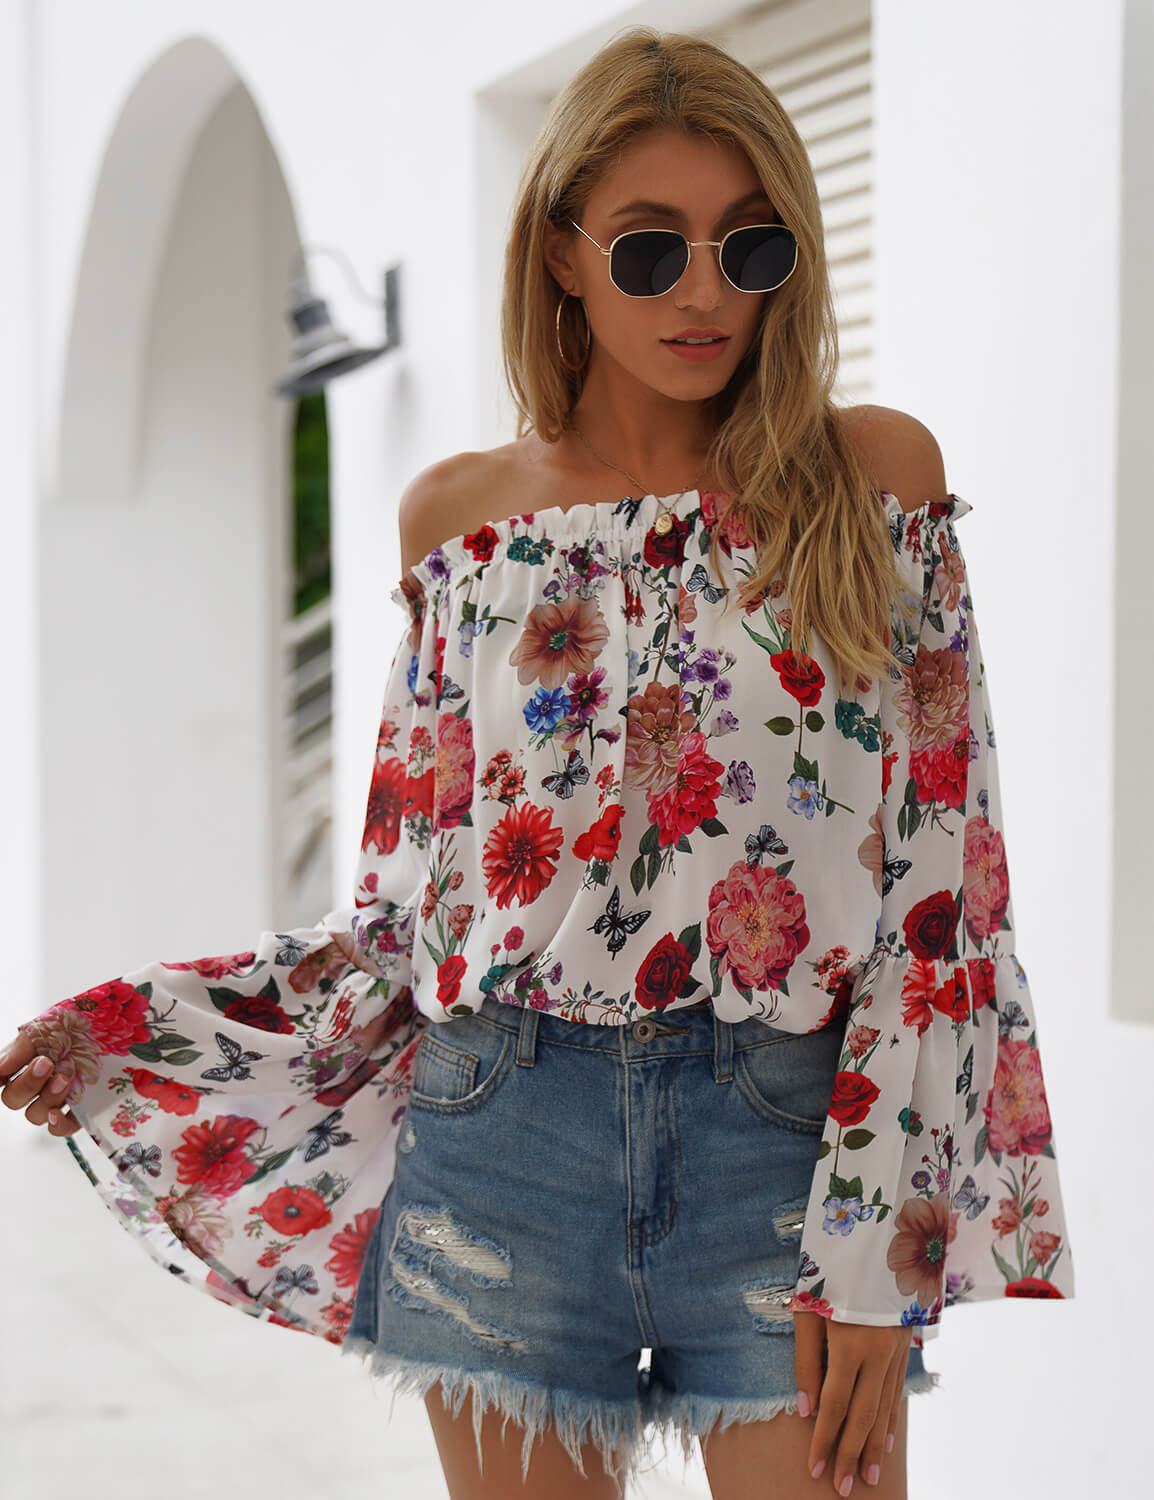 Blooming Jelly_Rose Garden Off Shoulder Floral Blouse_Floral Print_156288_21_Women Fashionable Outfits_Tops_Blouse